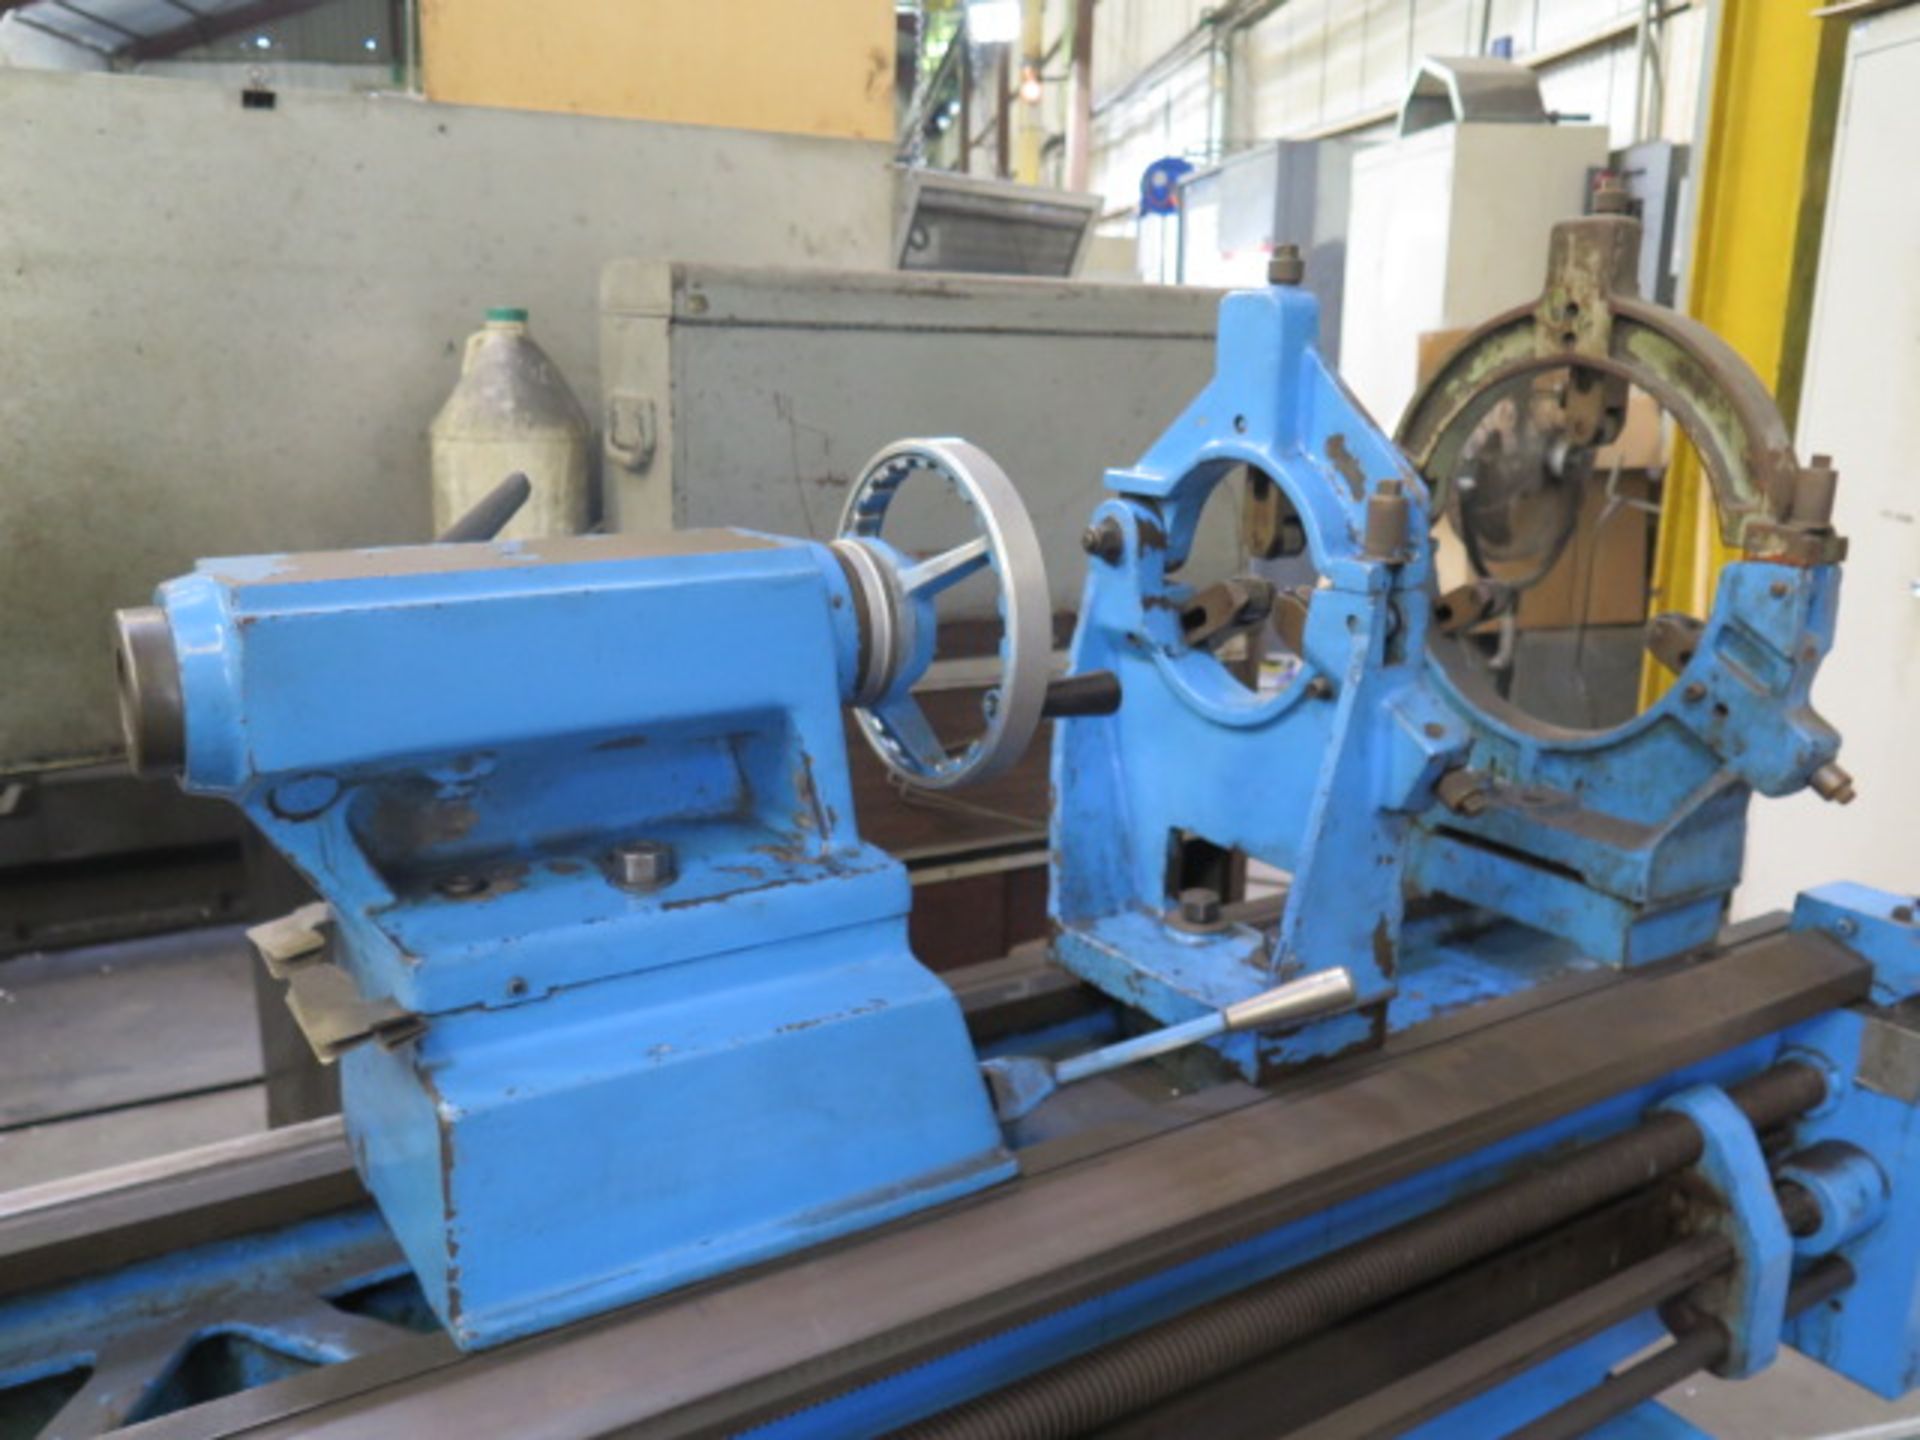 HES 24” x 108” Geared Head Gap Bed Lathe s/n 15239 w/ Newall C80 DRO, 24-960 RPM, SOLD AS IS - Image 14 of 19